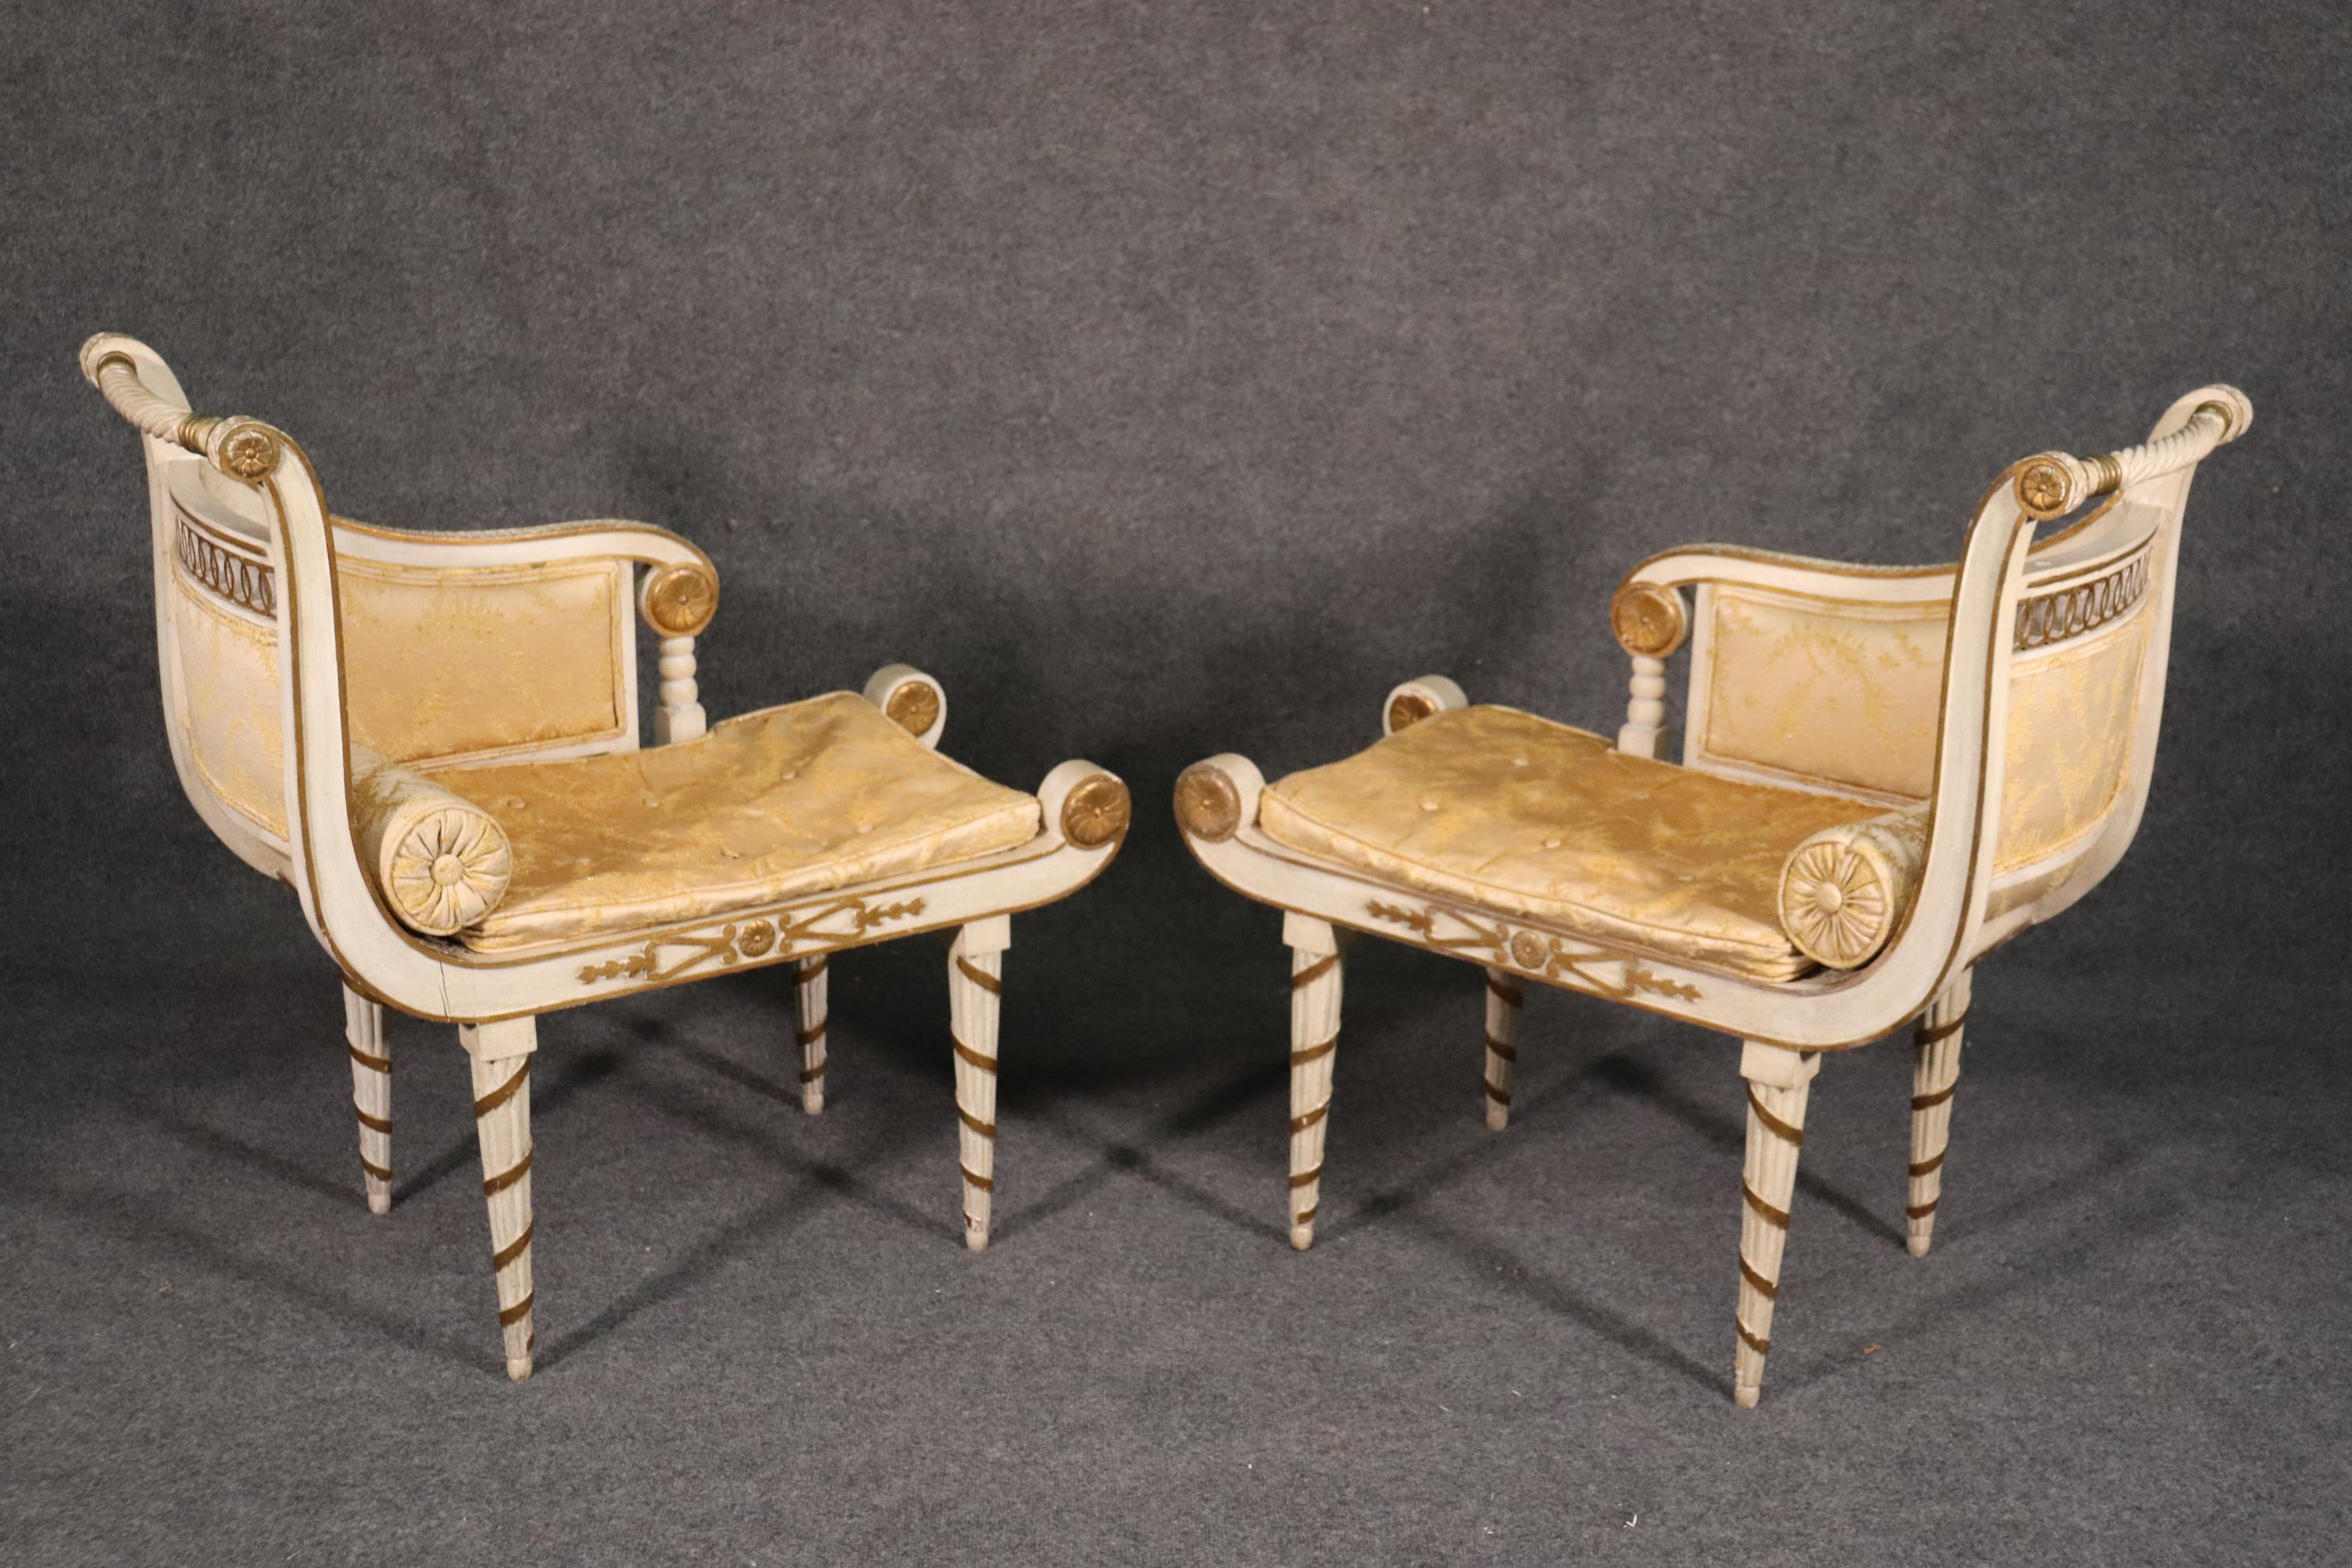 This is a very unique and beautiful pair of stools or benches shaped like mini chaises or recamiers. The chaises are in original condition and will shwo some wear and tear of the finish and the fabric but are essentially good for their 80 years of